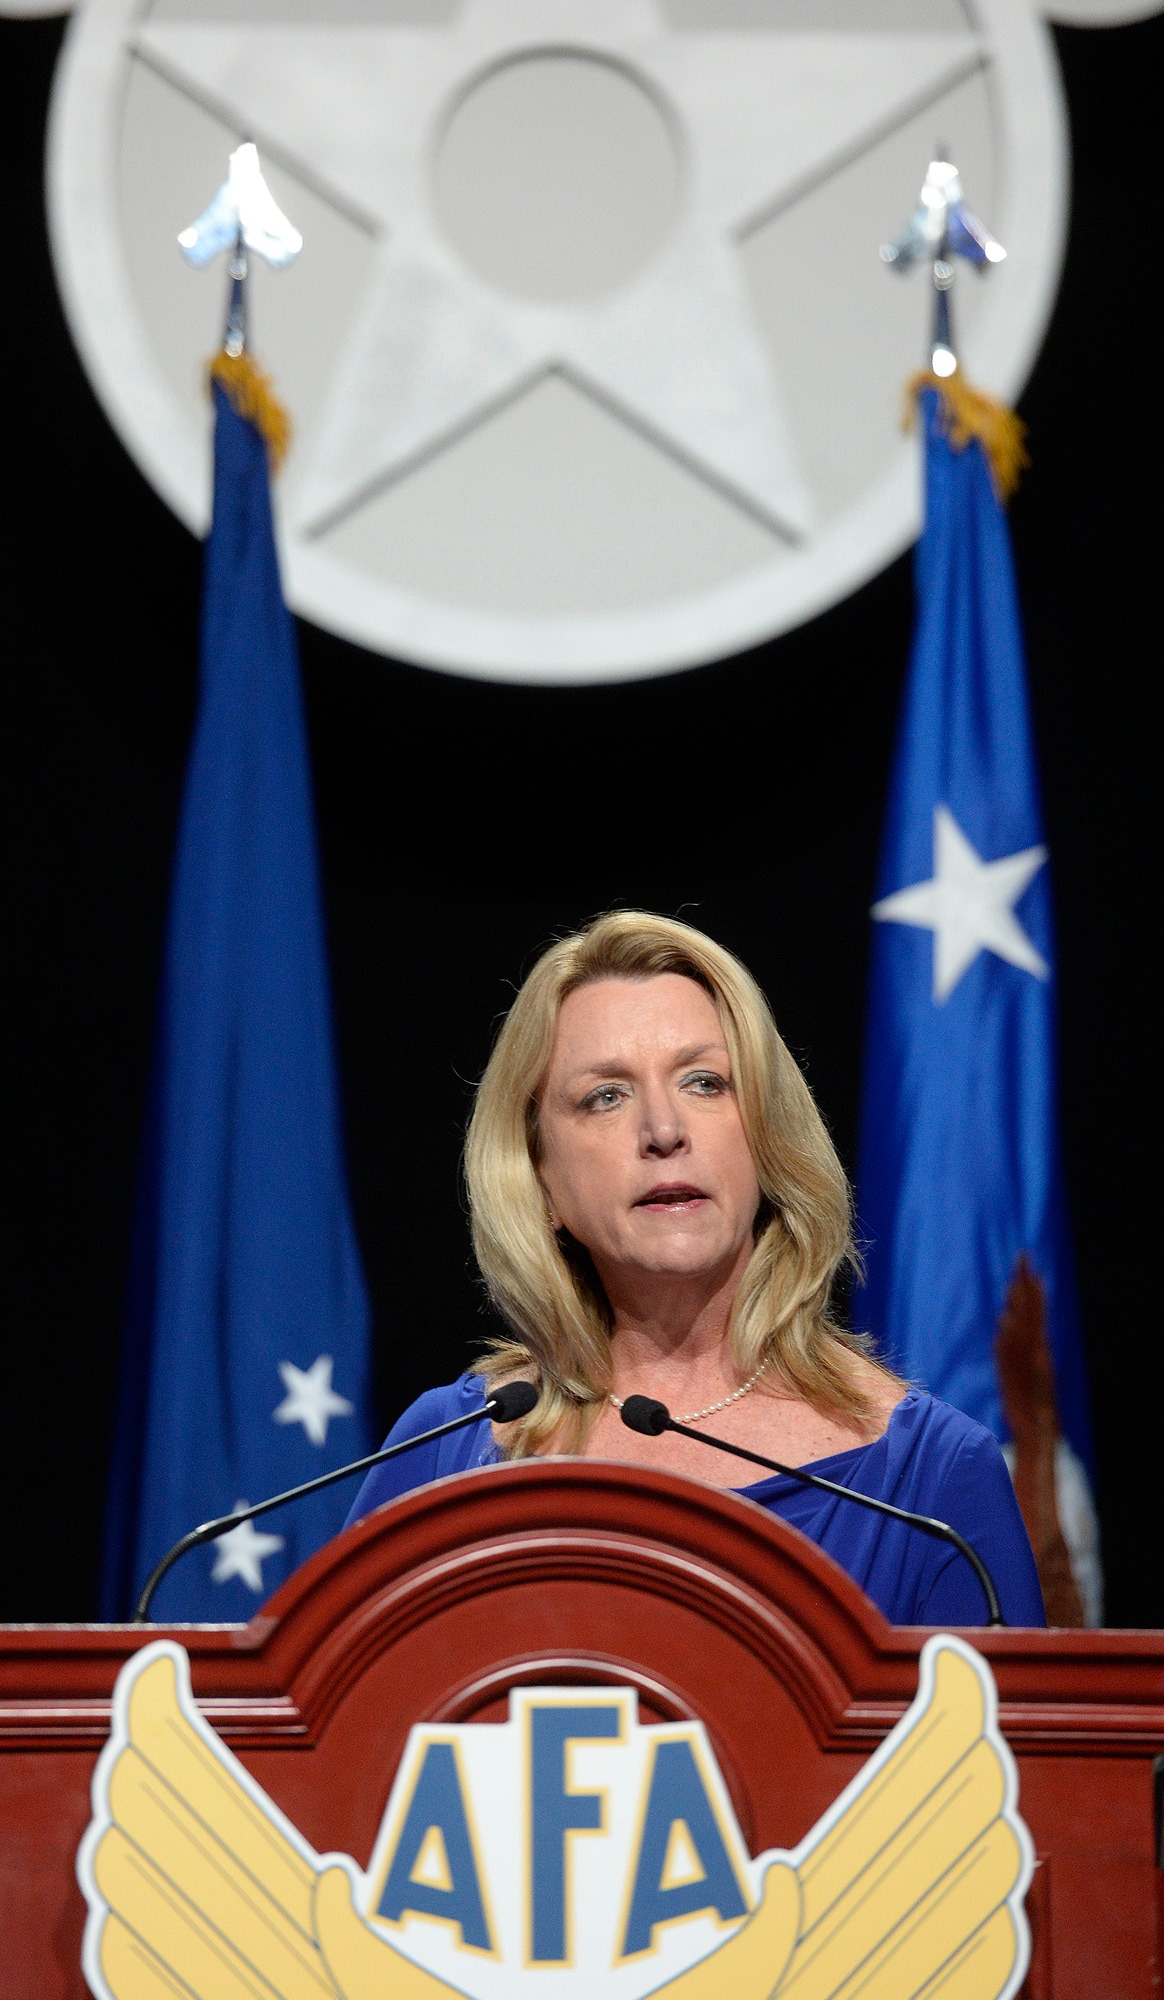 Secretary of the Air Force Deborah Lee James delivers her keynote speech at the Air Force Association's Air and Space Conference and Technology Exposition in Washington, D.C., Sept. 14, 2015. In her speech, James outlined how the Air Force and industry must partner to expand, advance, and ultimately reinvent the aerospace nation. (U.S. Air Force photo/Scott M. Ash) 